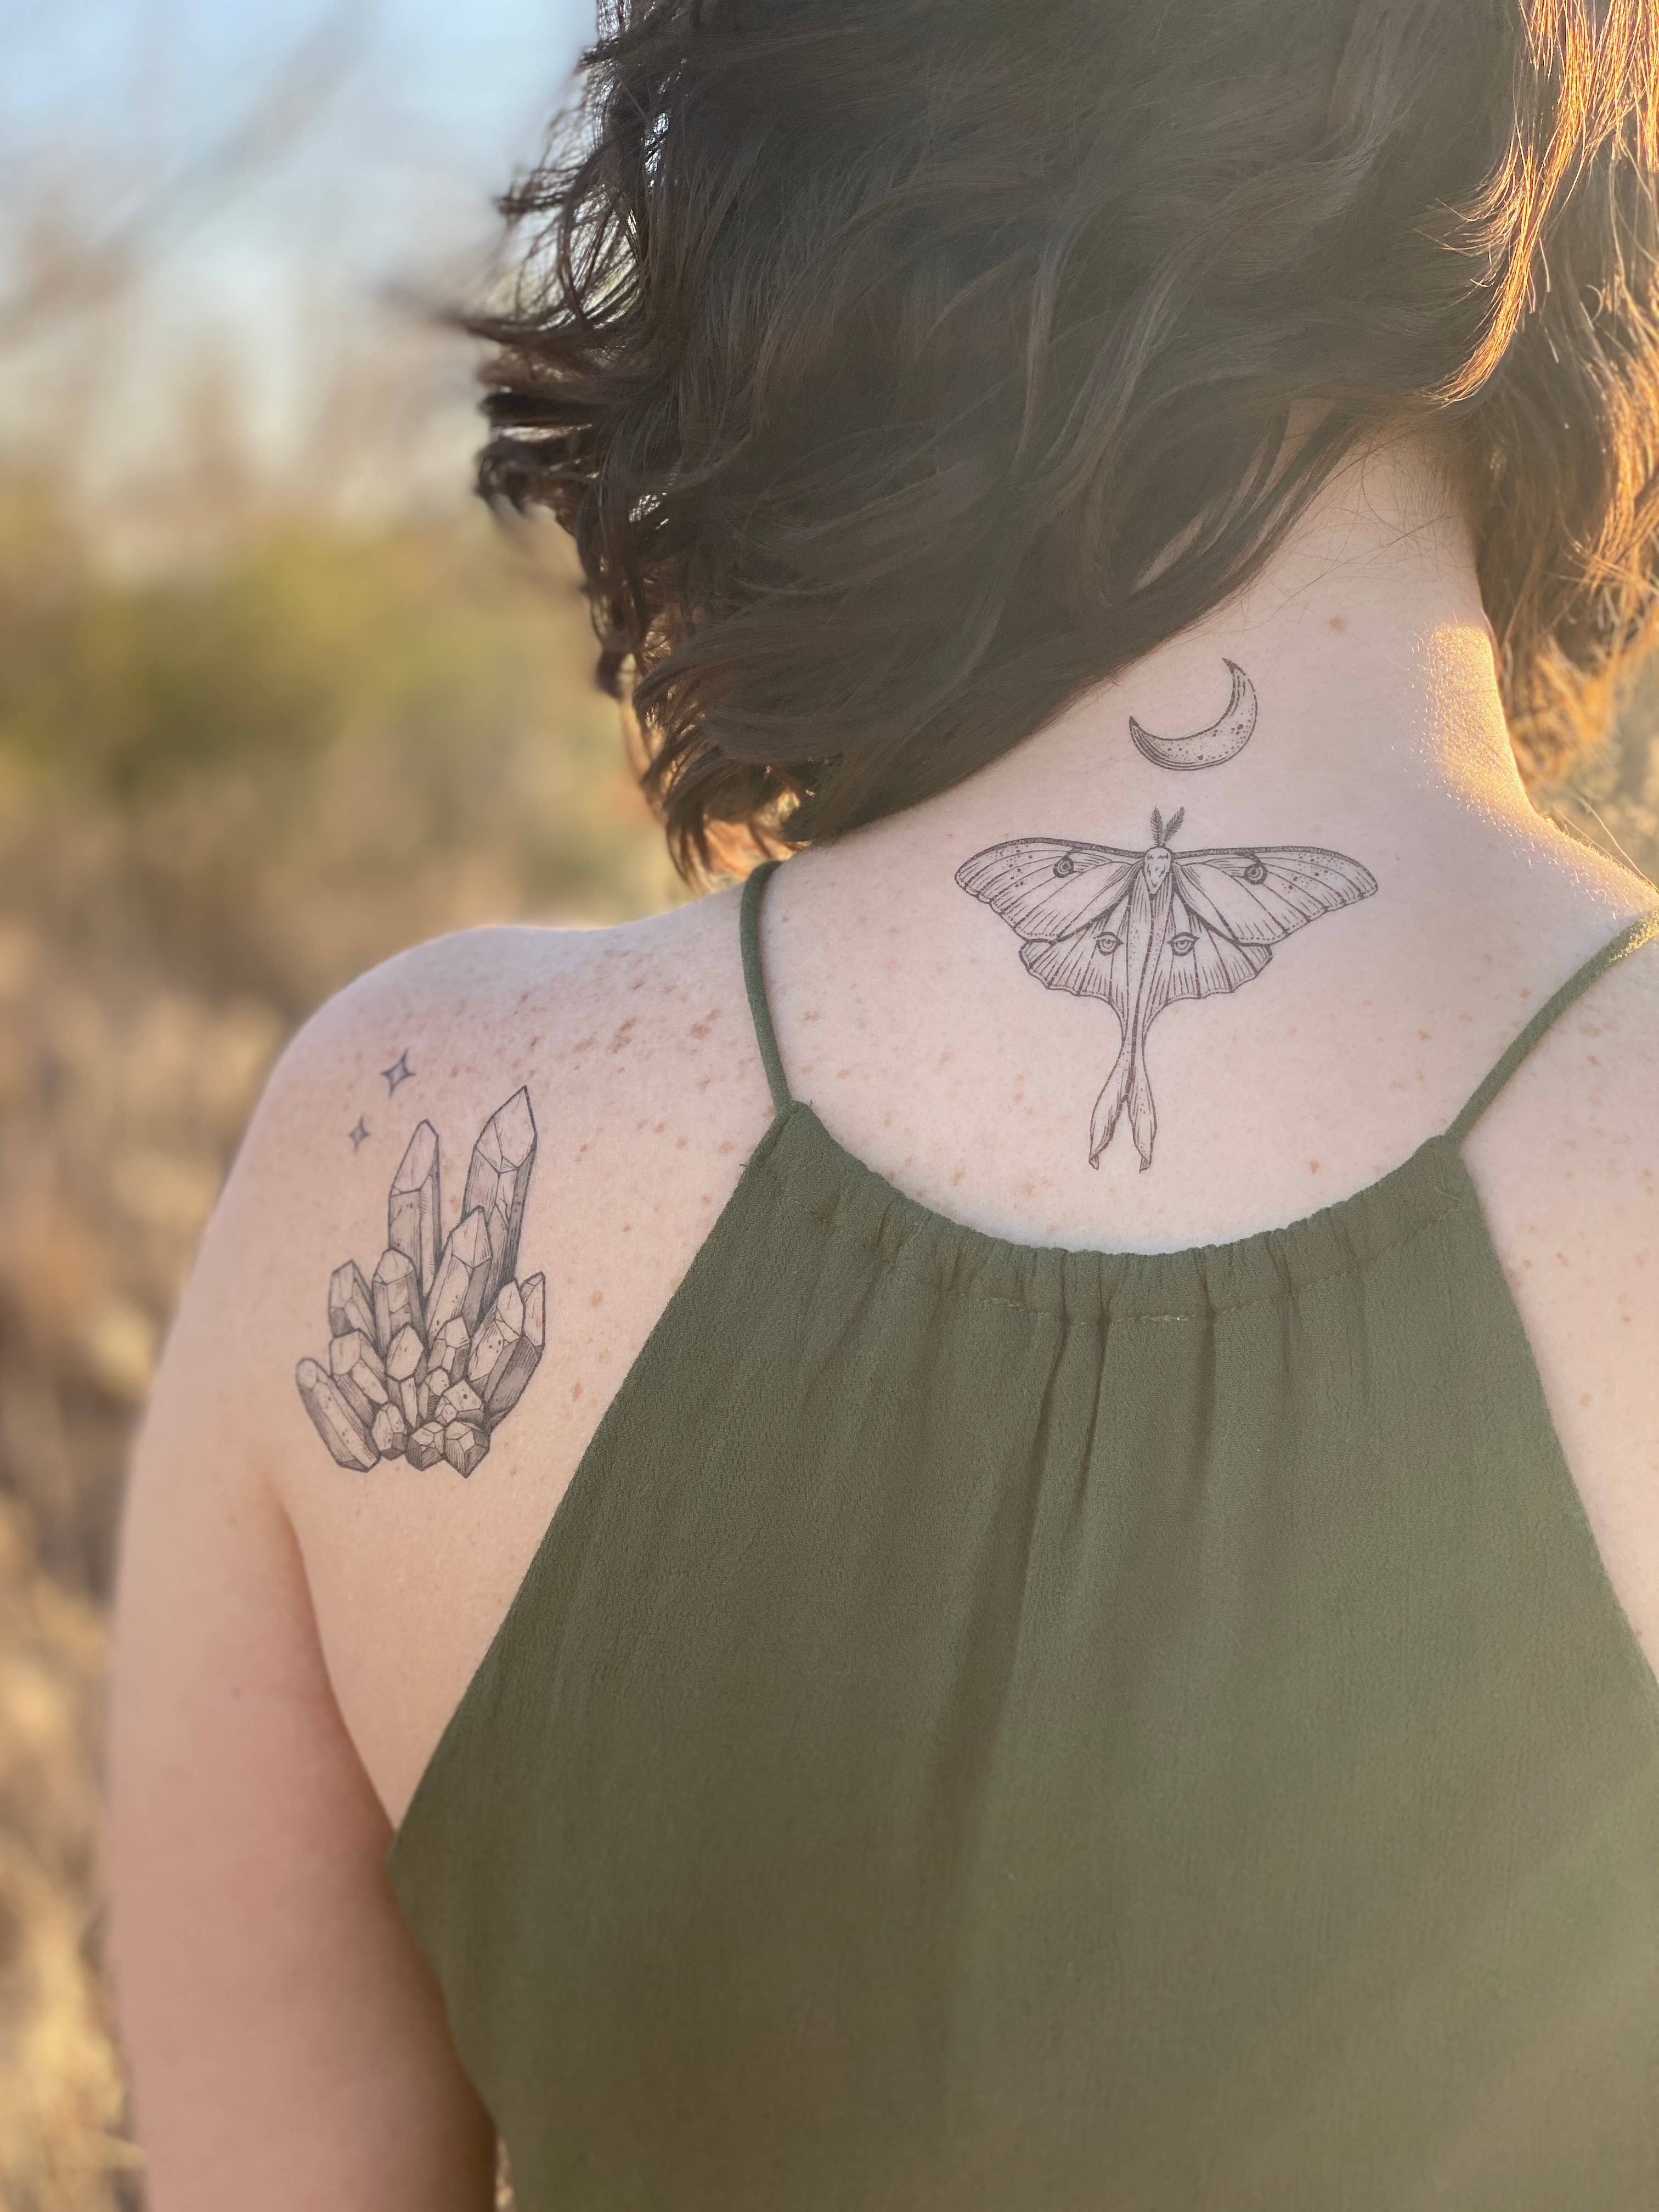 Moth and crescent moon by Karry Ka-Ying Poon - Tattoogrid.net